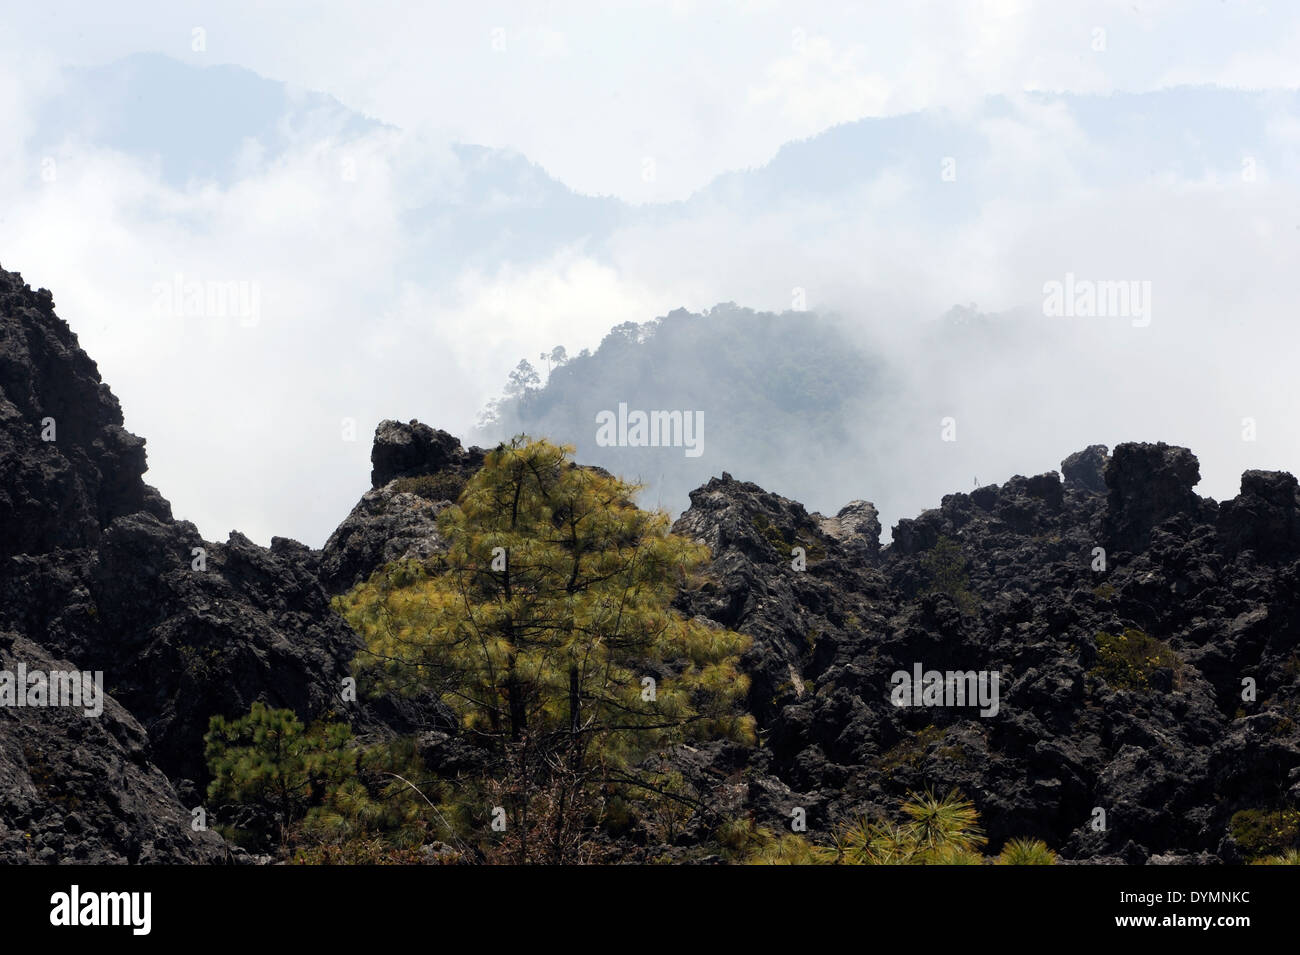 Vivid green pine trees grow in a black lava field in the Mar de Piedra, the Stone Sea, an area of solidified lava flows Stock Photo